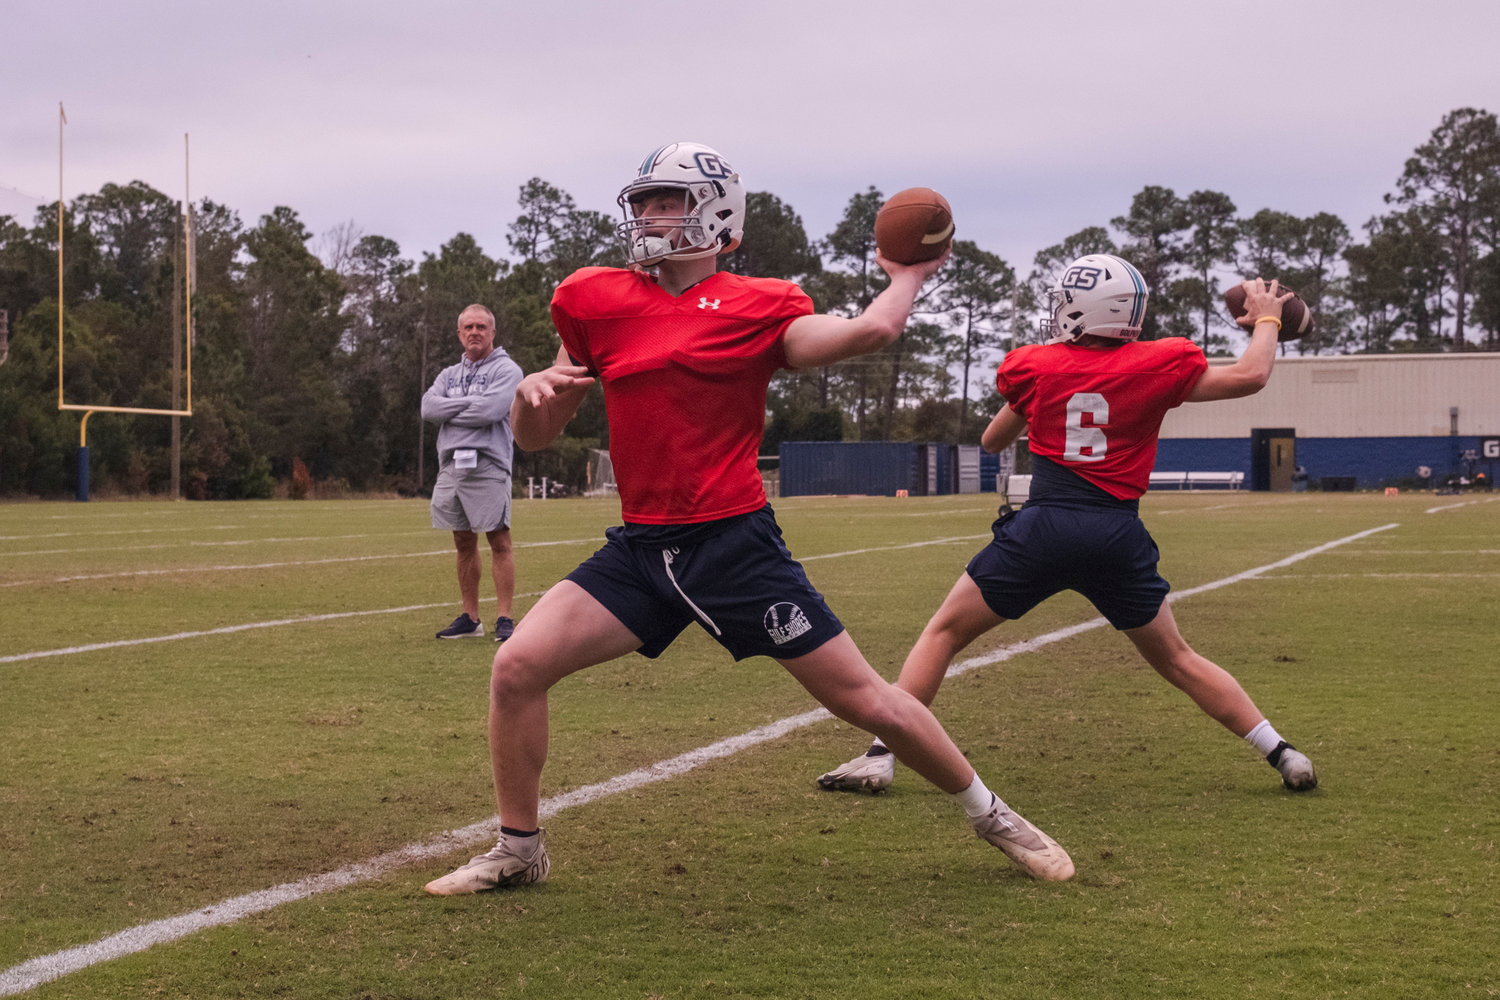 Gulf Shores senior quarterback Brendon Byrd (foreground) loads a throw during Tuesday afternoon’s practice at the high school. The Dolphins are in the third round of the AHSAA state playoffs for the first time ever and are set to host their second playoff game in three weeks Friday night against the Faith Academy Rams.